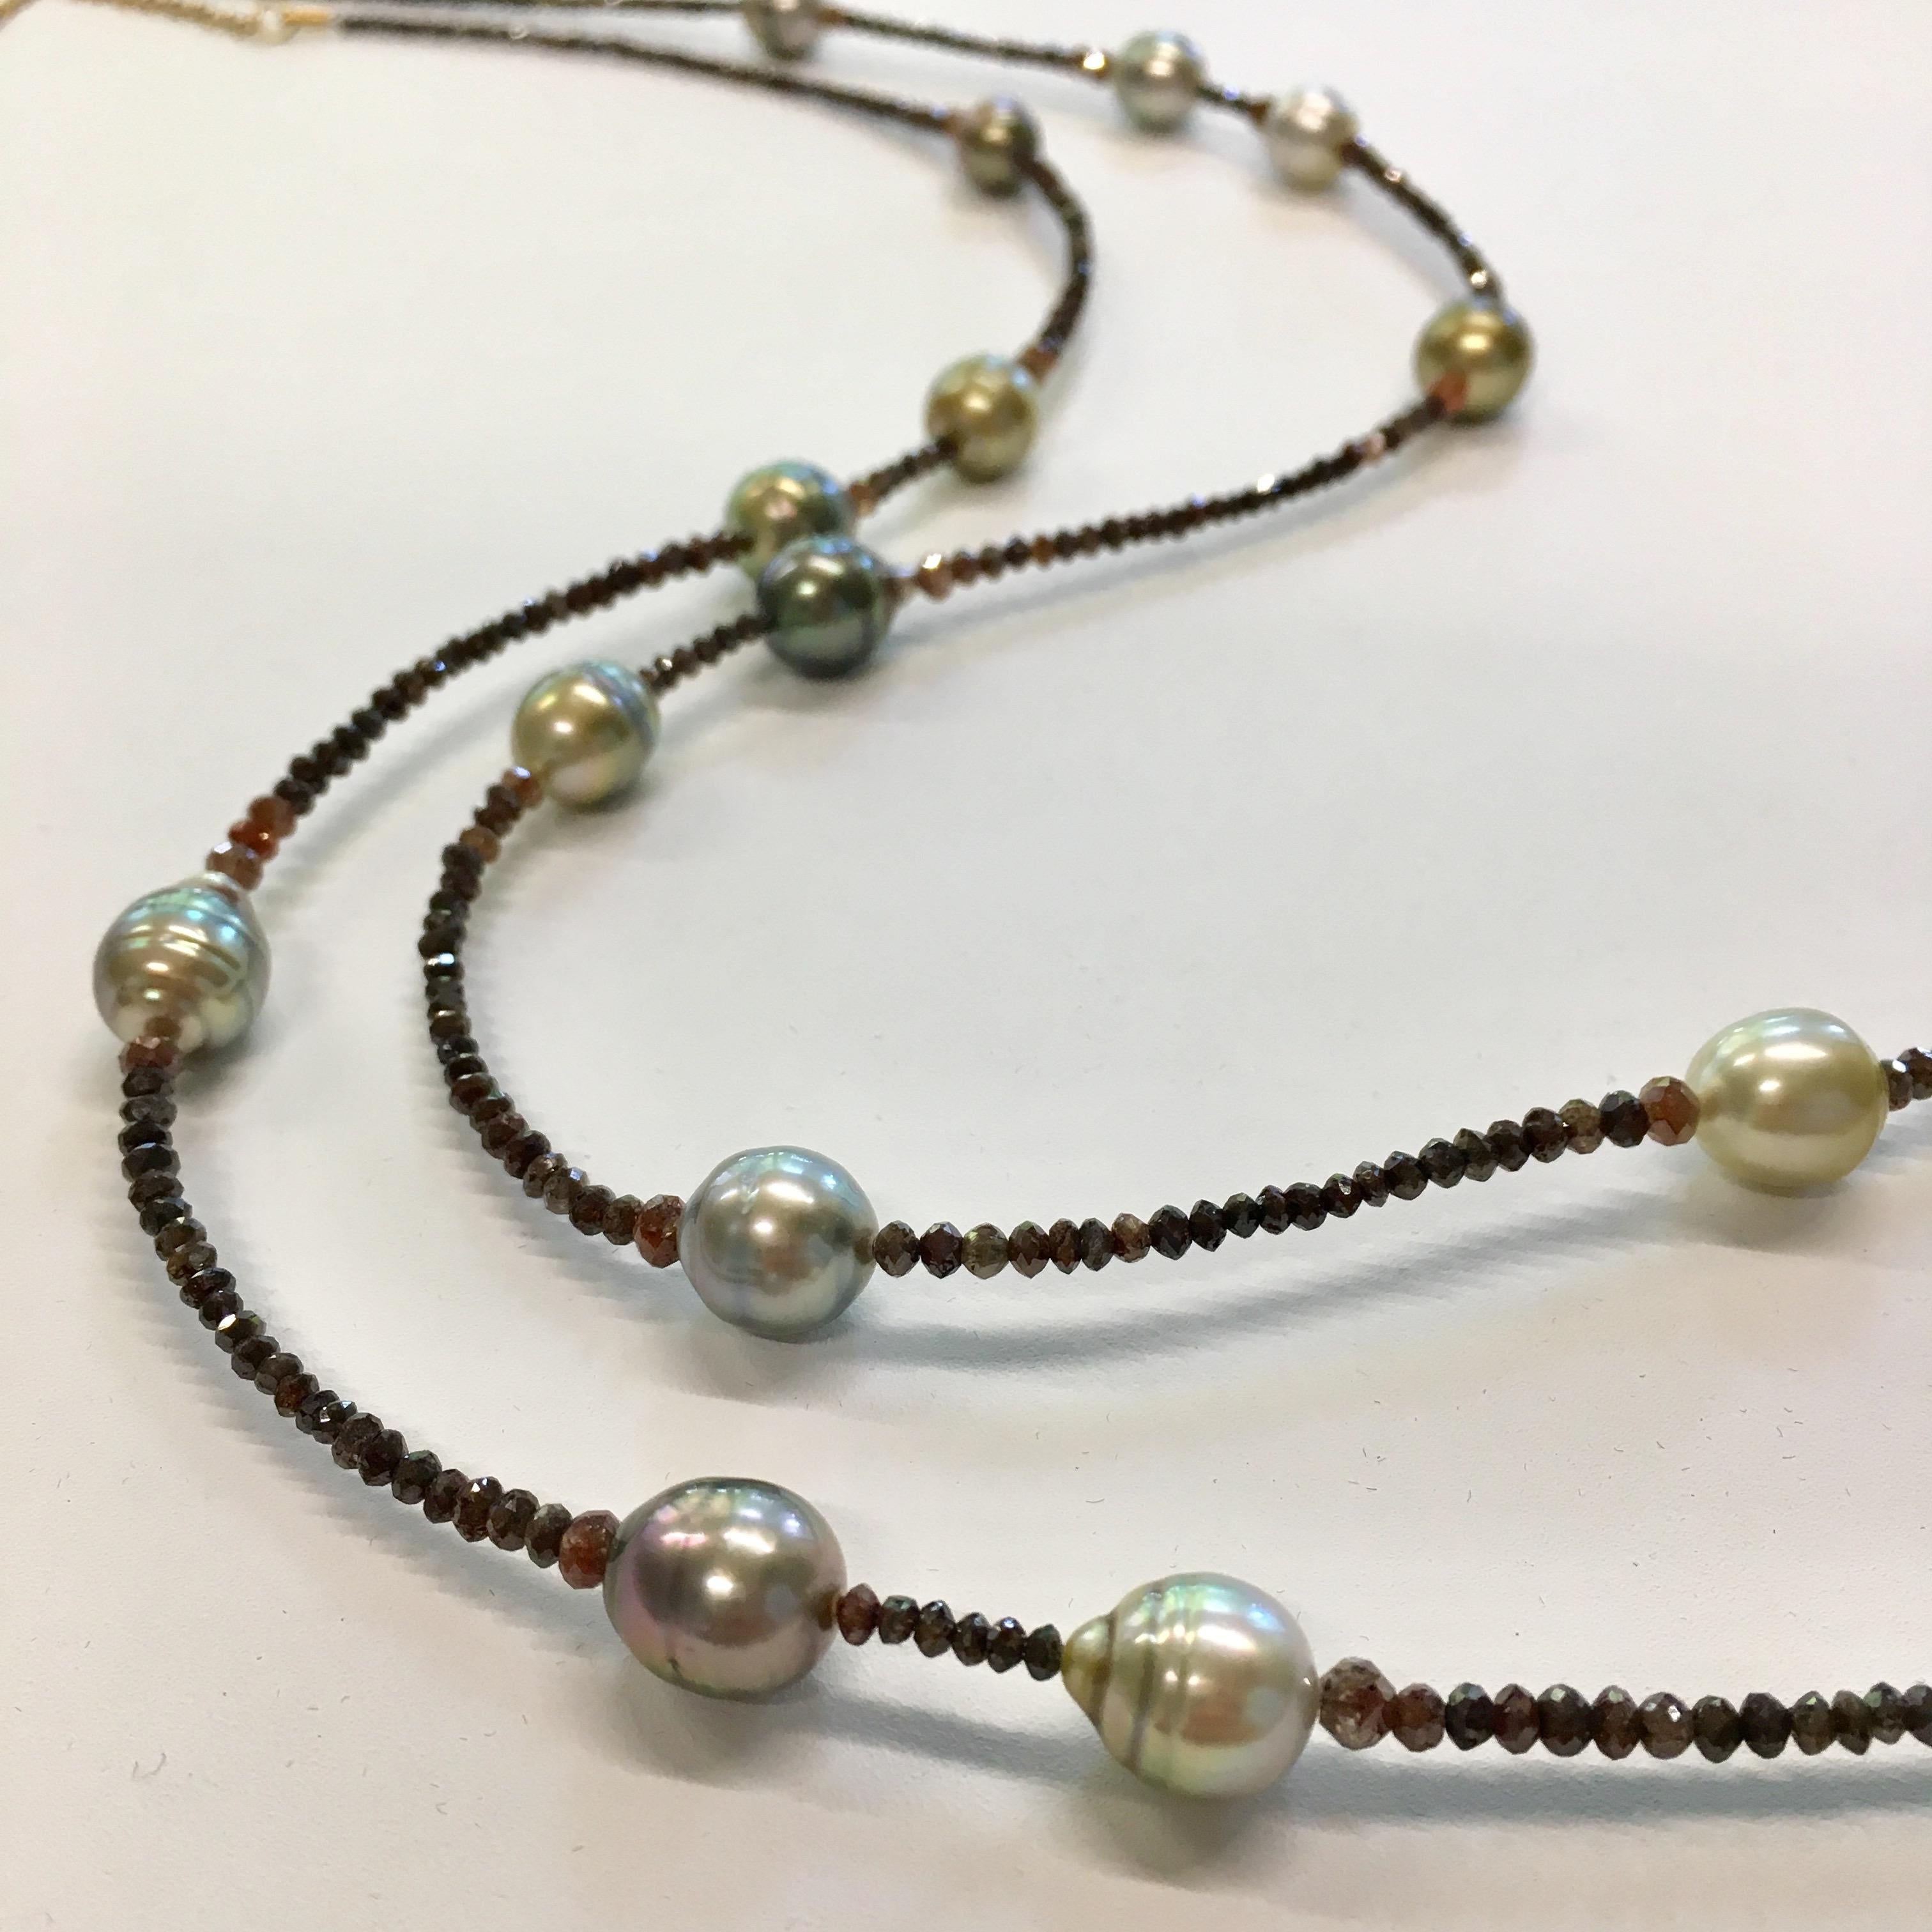 44 ct. of brown and burgundy color diamond beads, all natural
16 of the real rare Fiji Pearls in a beautiful mix and match color combination
total length of 100 cm incl. 10 cm extension chain in Rose gold 18 Karat.